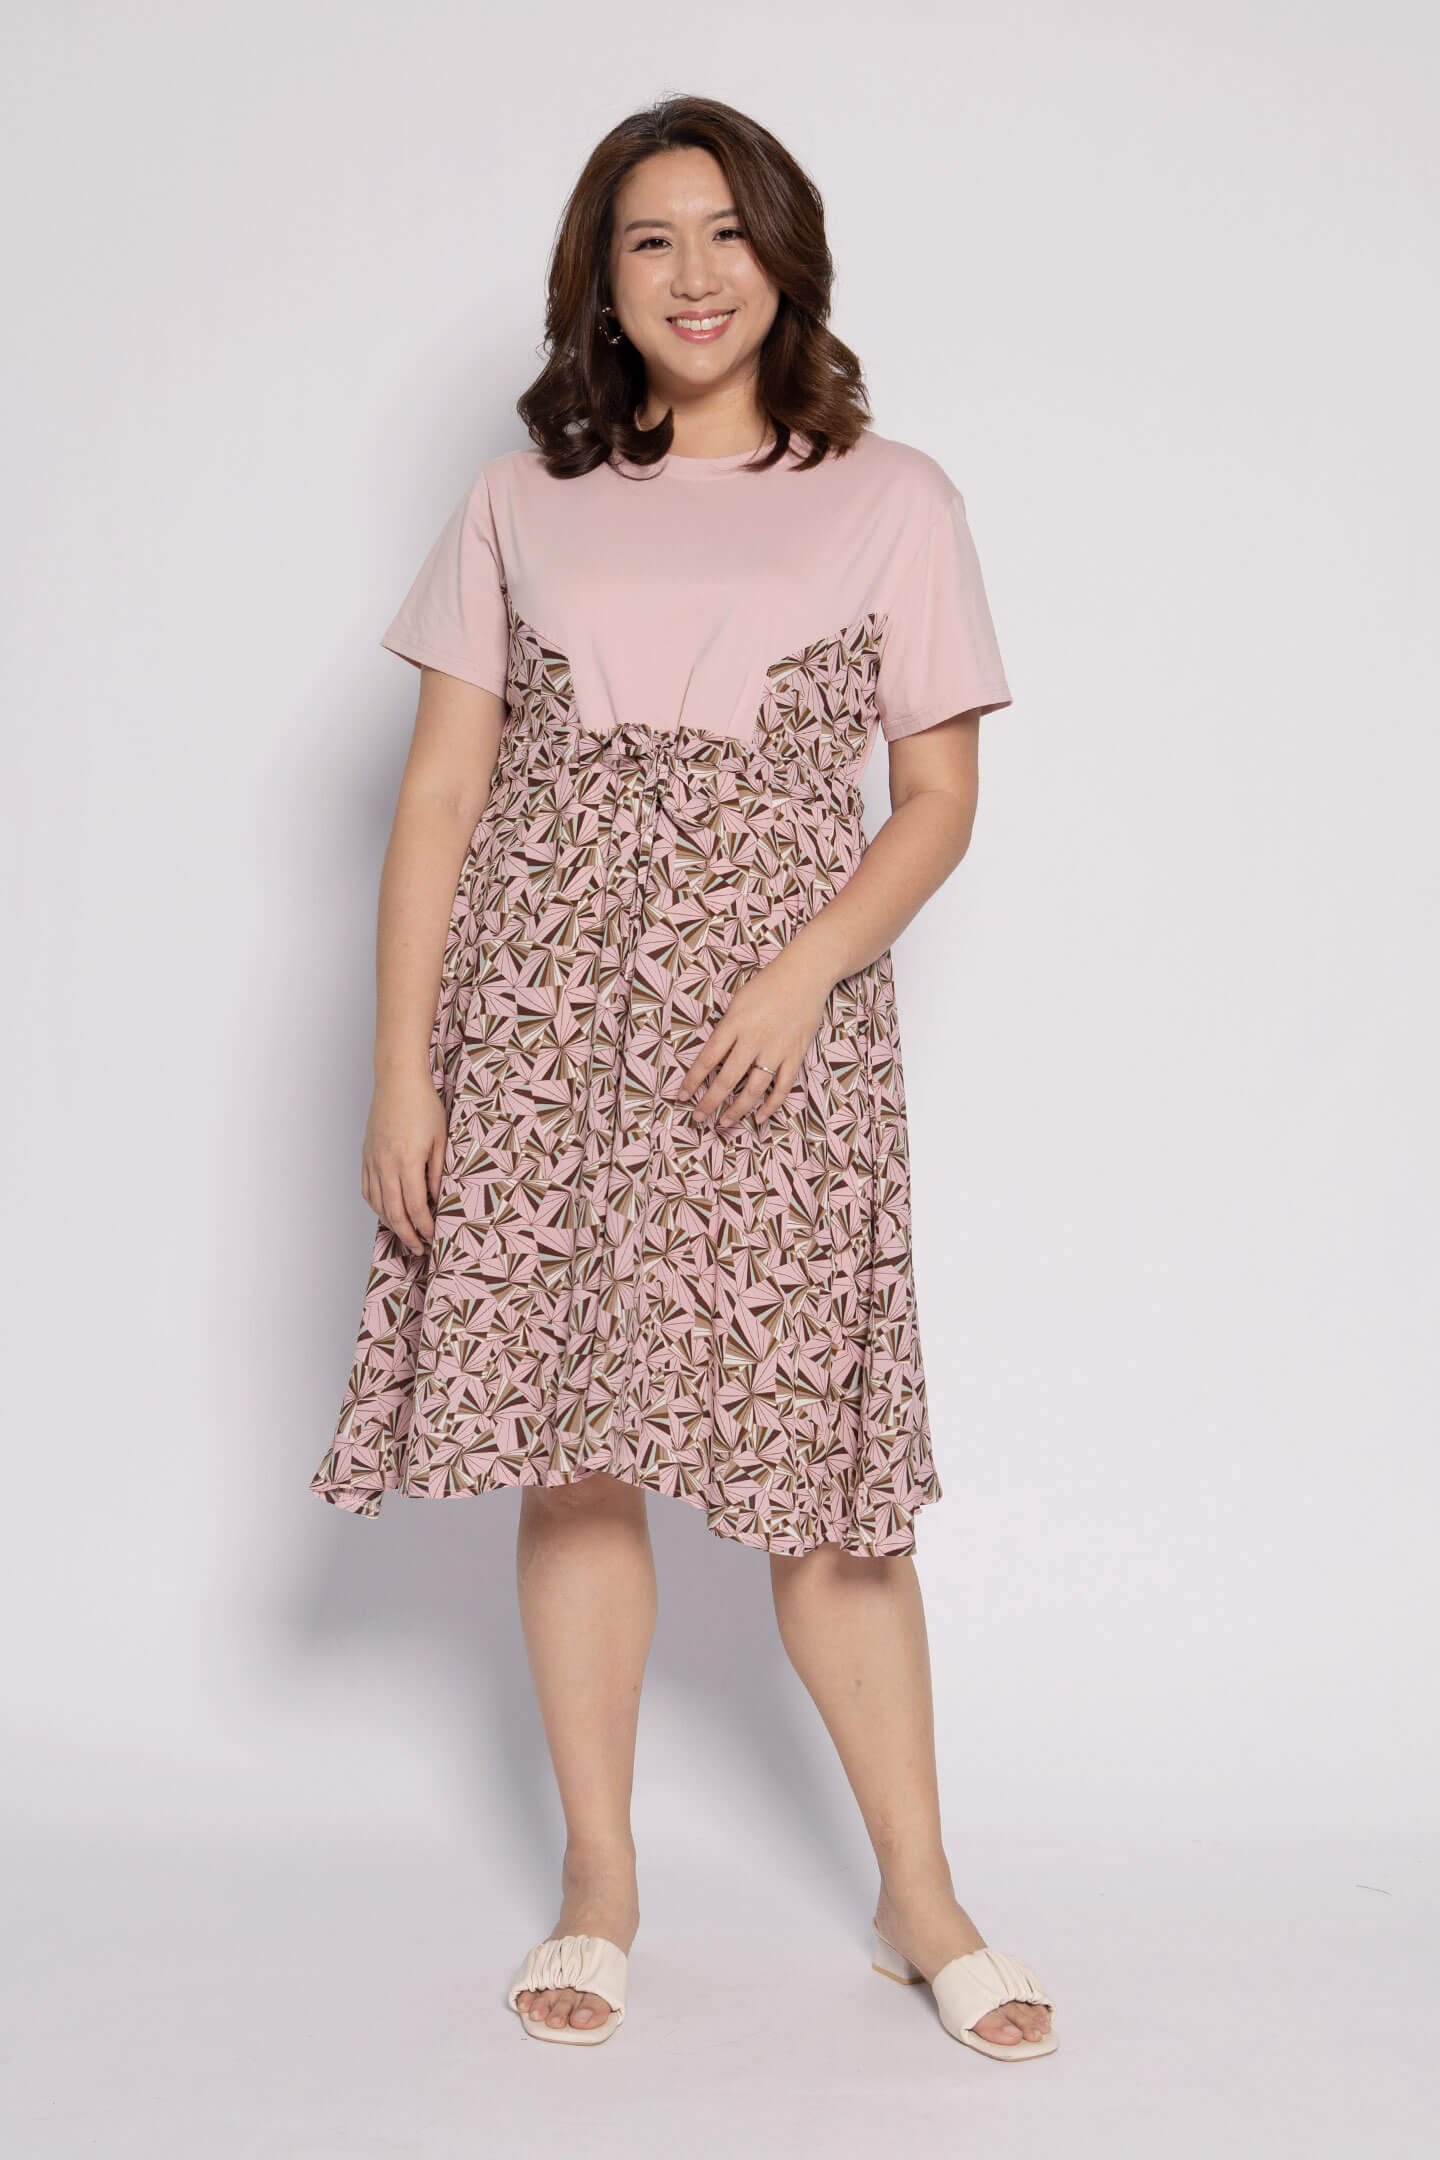 Lois Dress in Pink Floral